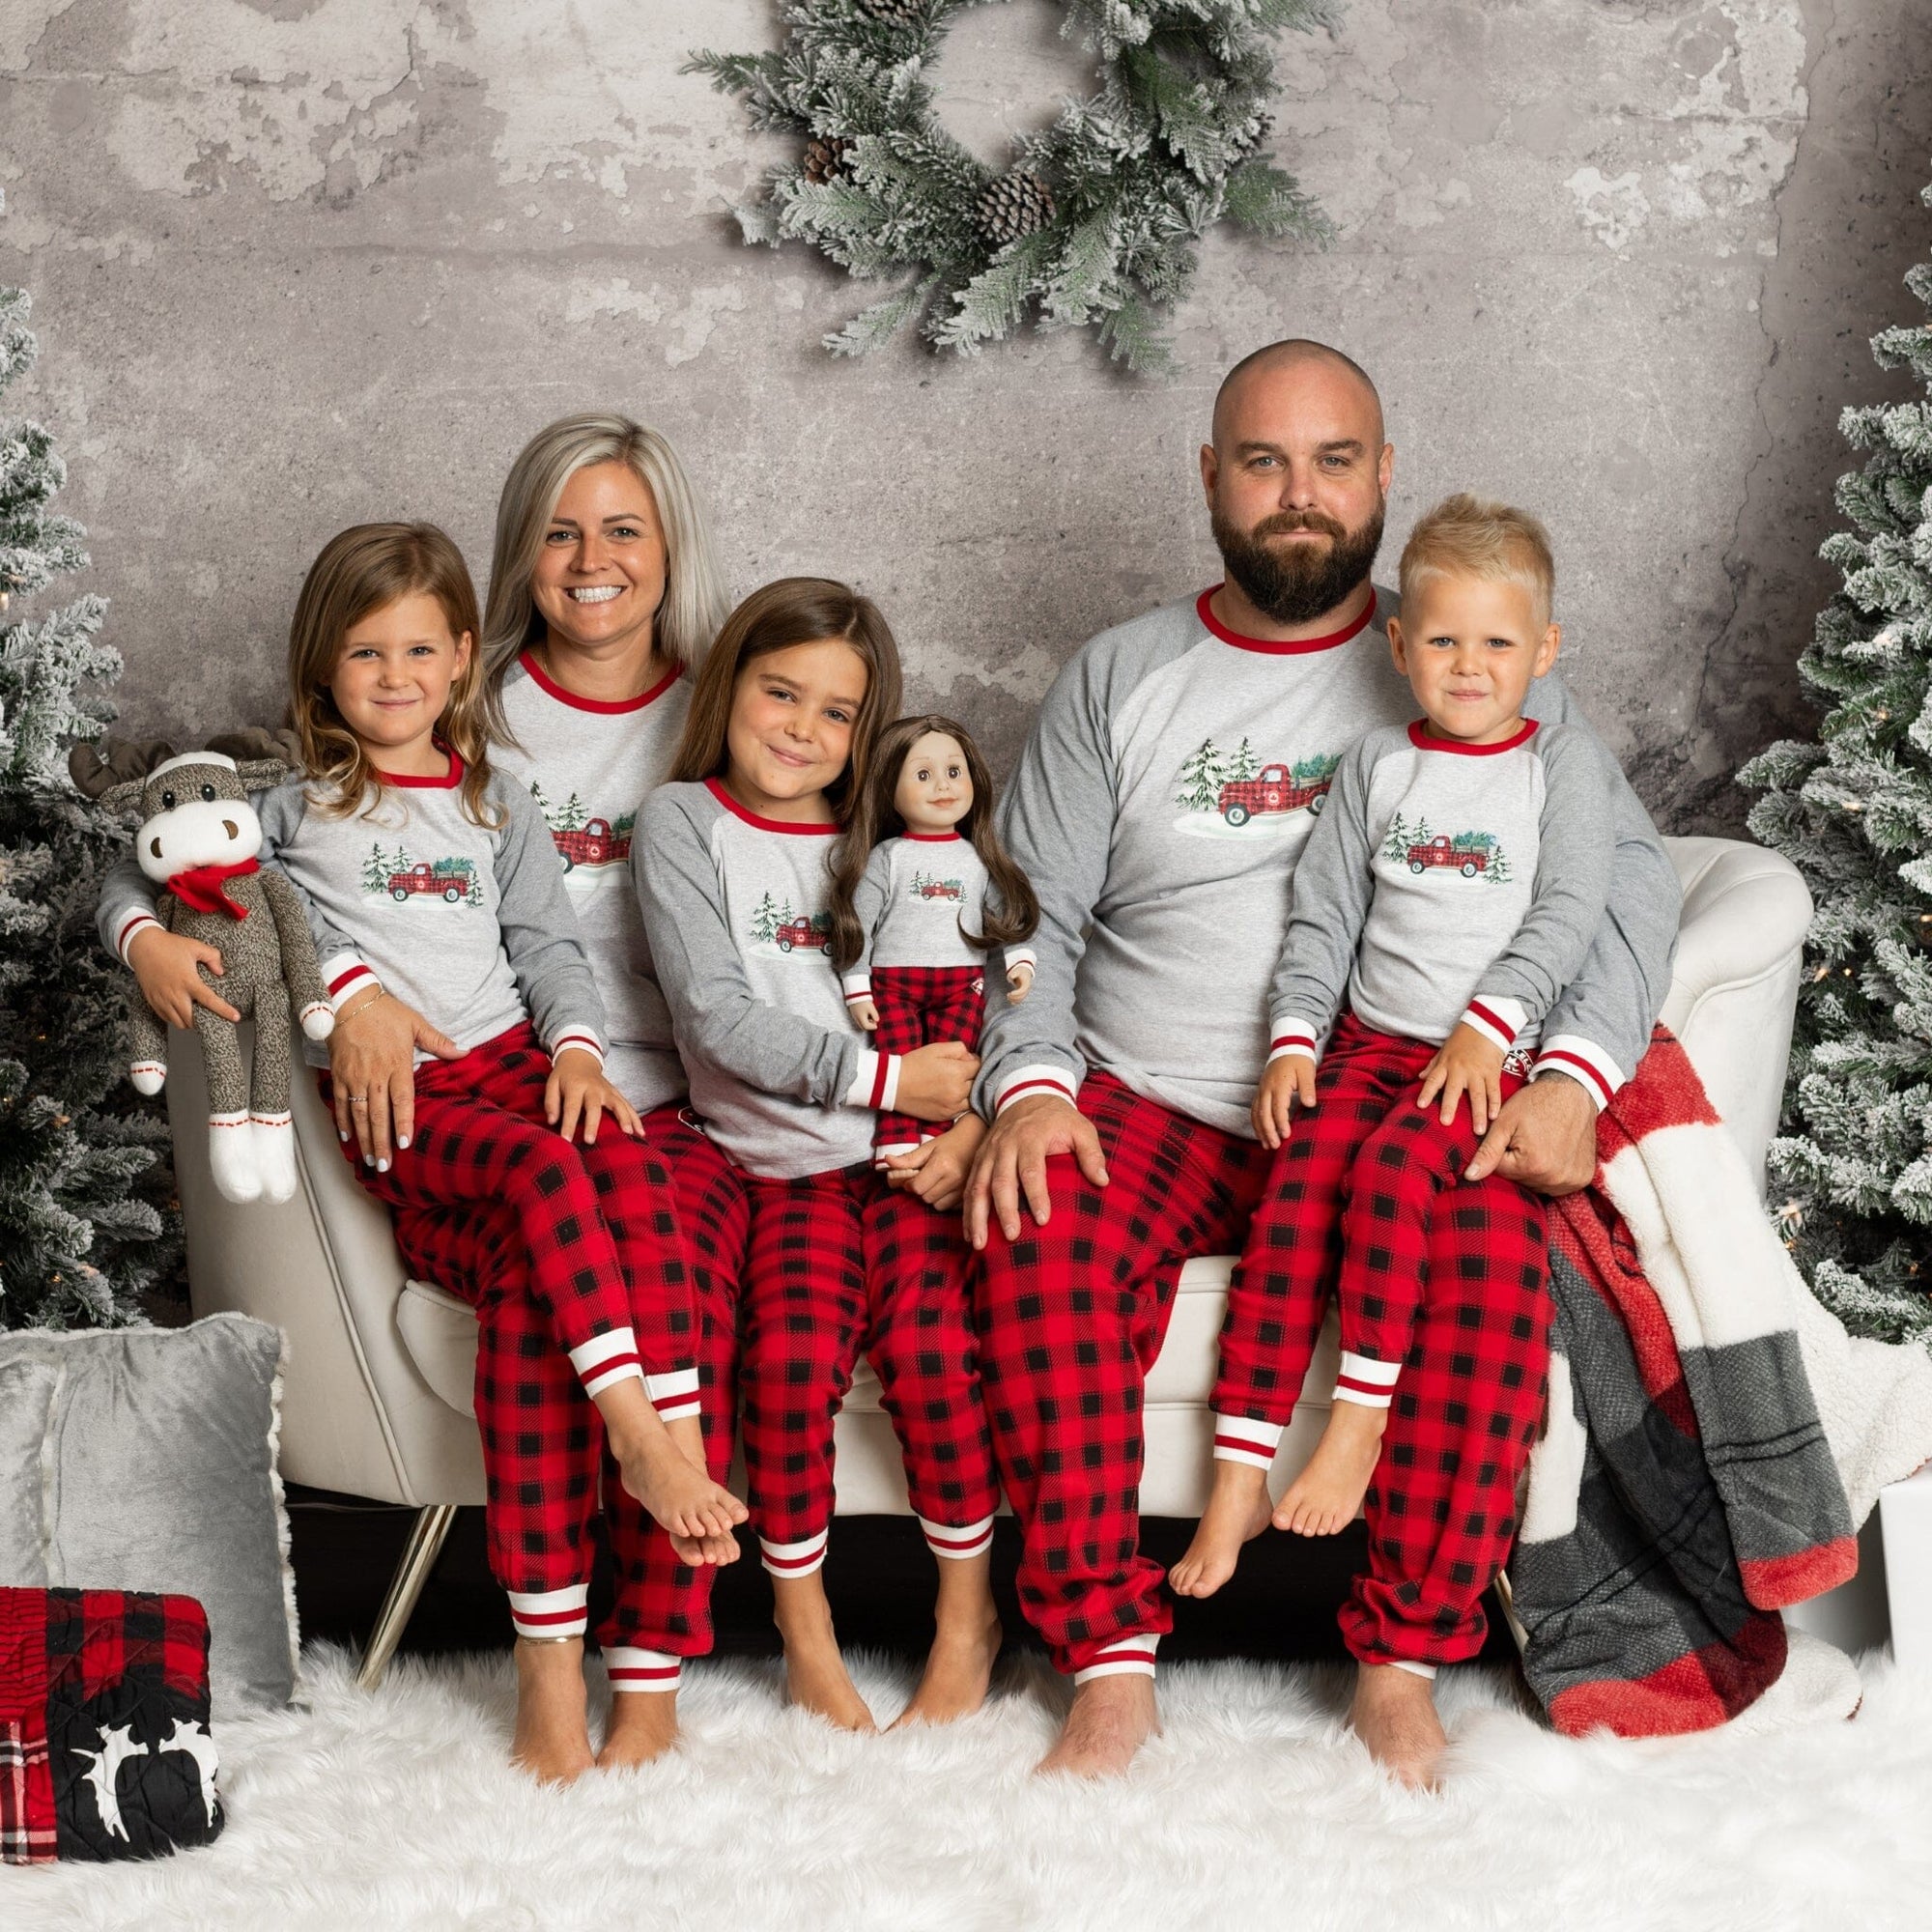 Personalized Nightgown & Matching Doll PJs